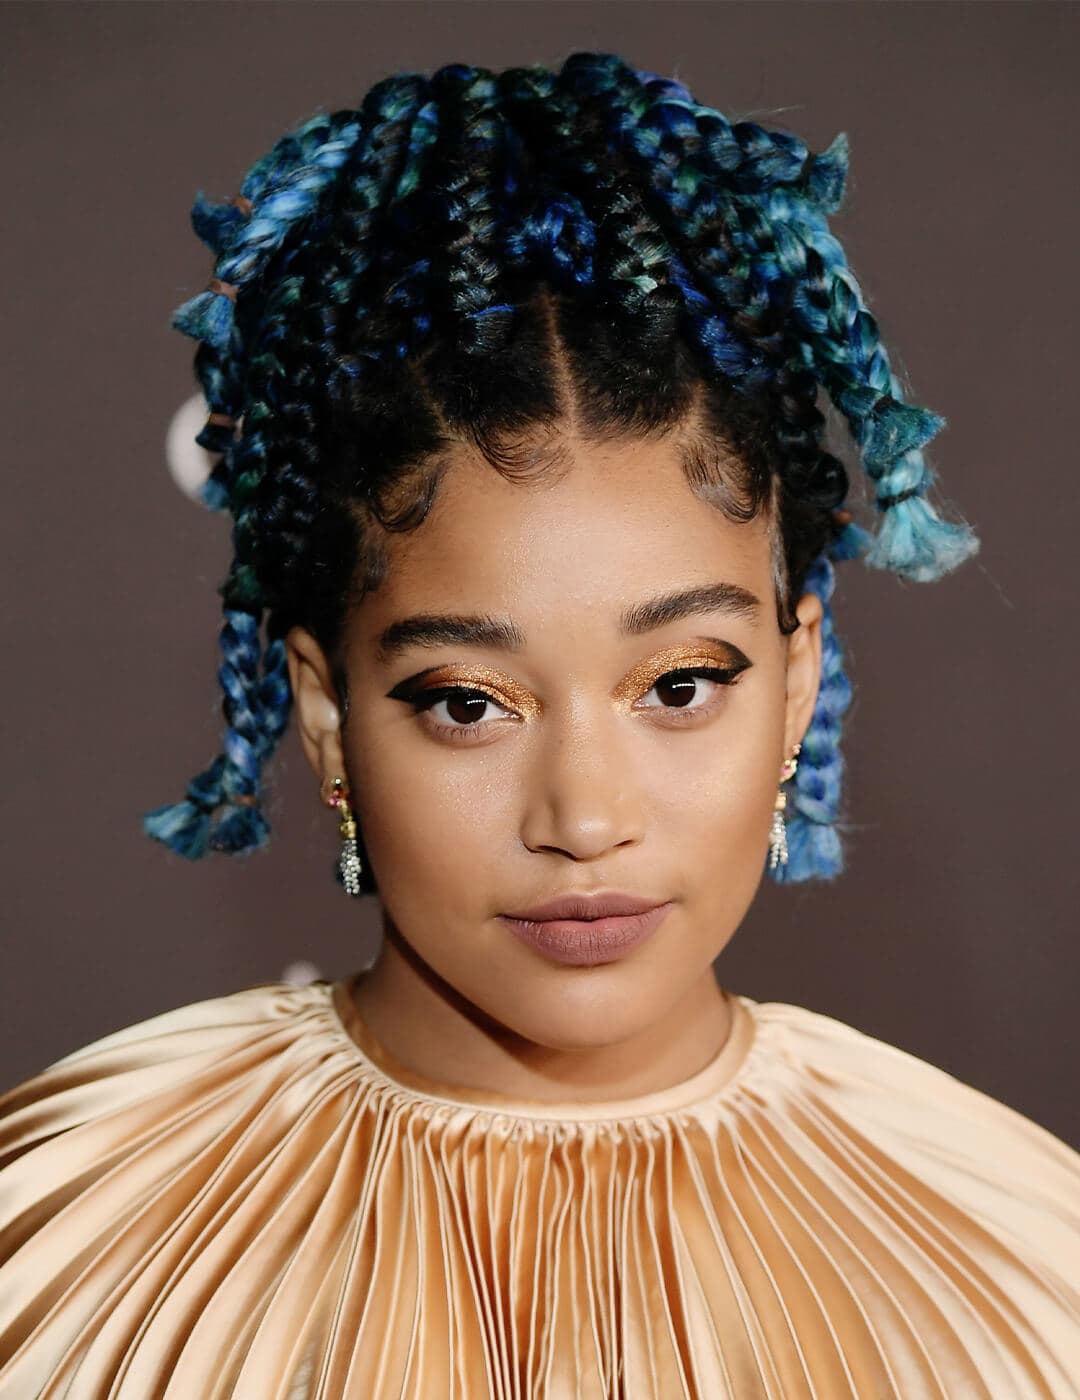 Amandla Stenberg looking glamorous in a textured cream dress and waterfall braided hairstyle